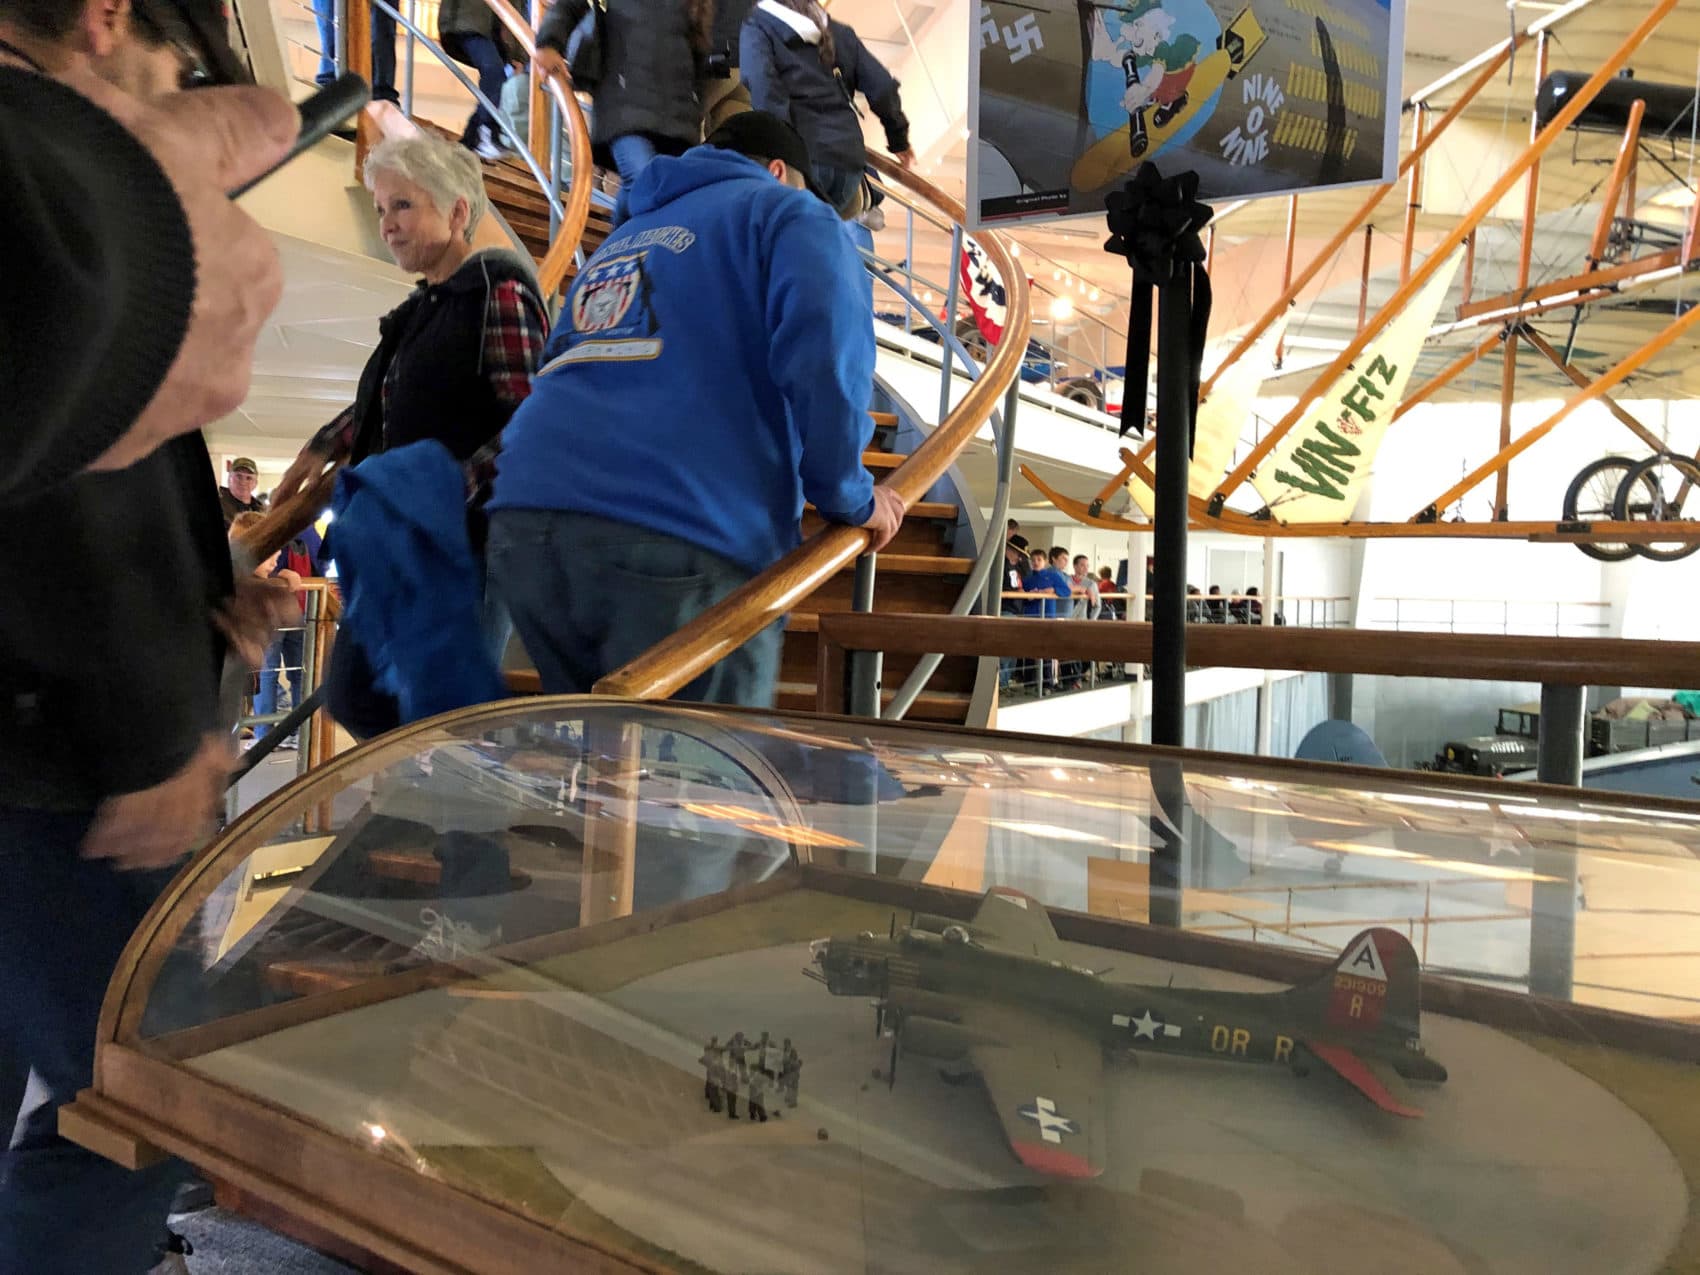 Visitors at the Collings Foundation's American Heritage Museum in Hudson filed past a model of the B-17 that crashed. (Callum Borchers WBUR)